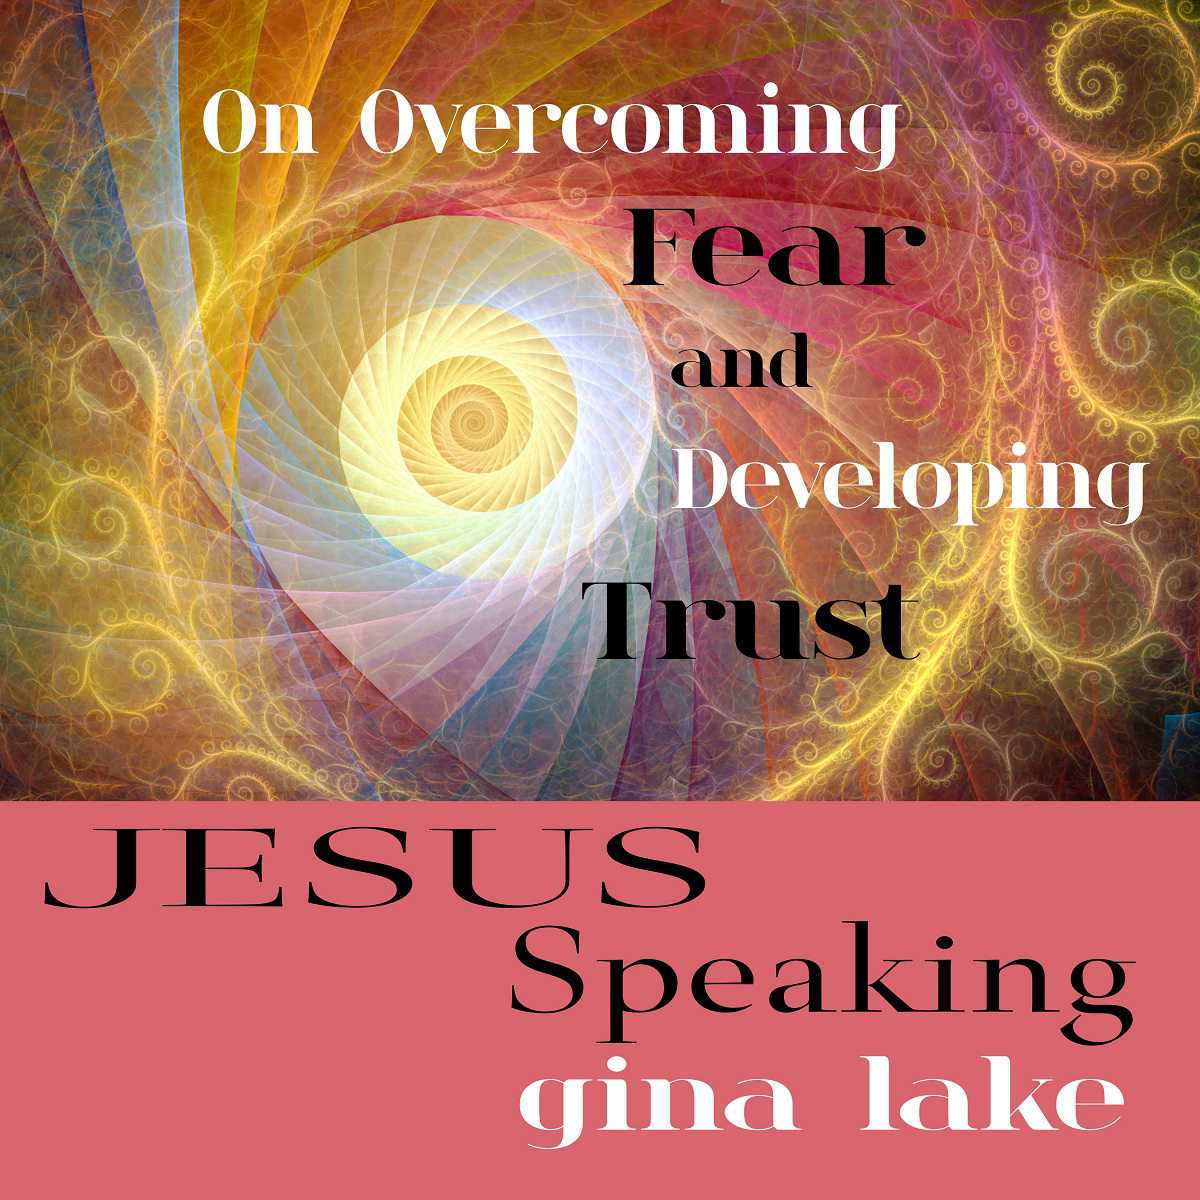 Jesus Speaking 2 on Overcoming Fear and Developing Trust Audiobook